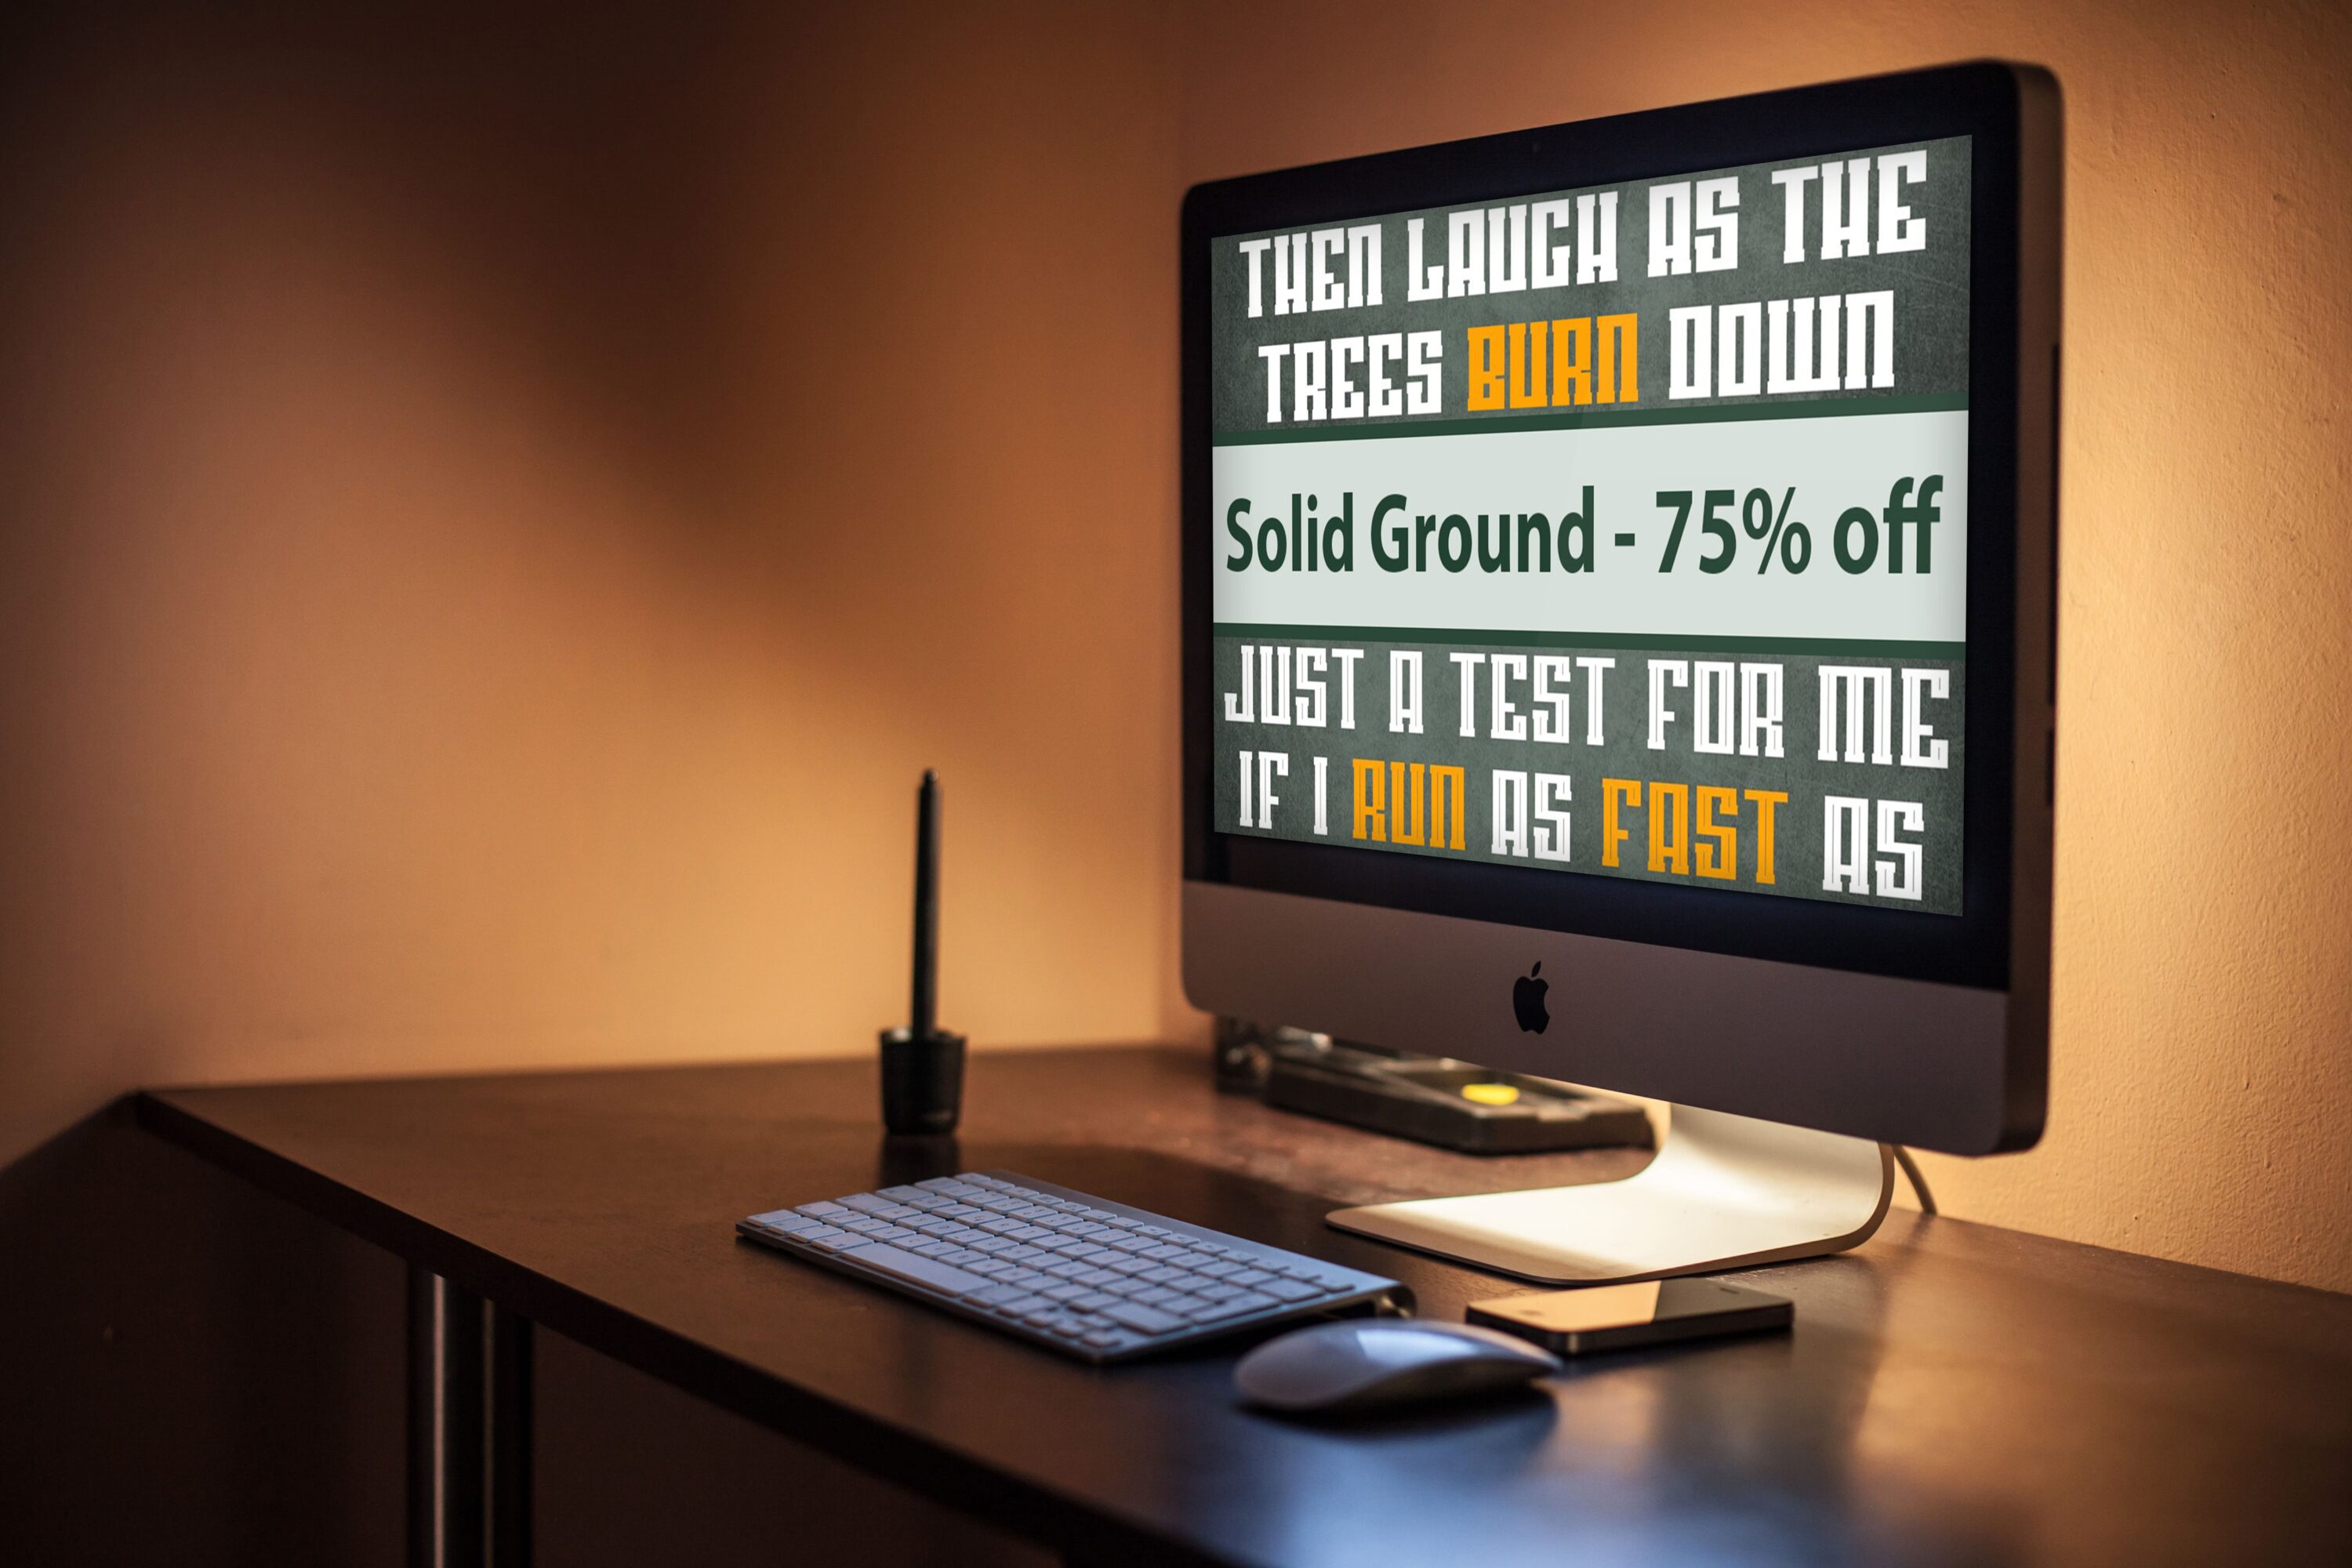 Desktop option of the Solid Ground - 75% off.